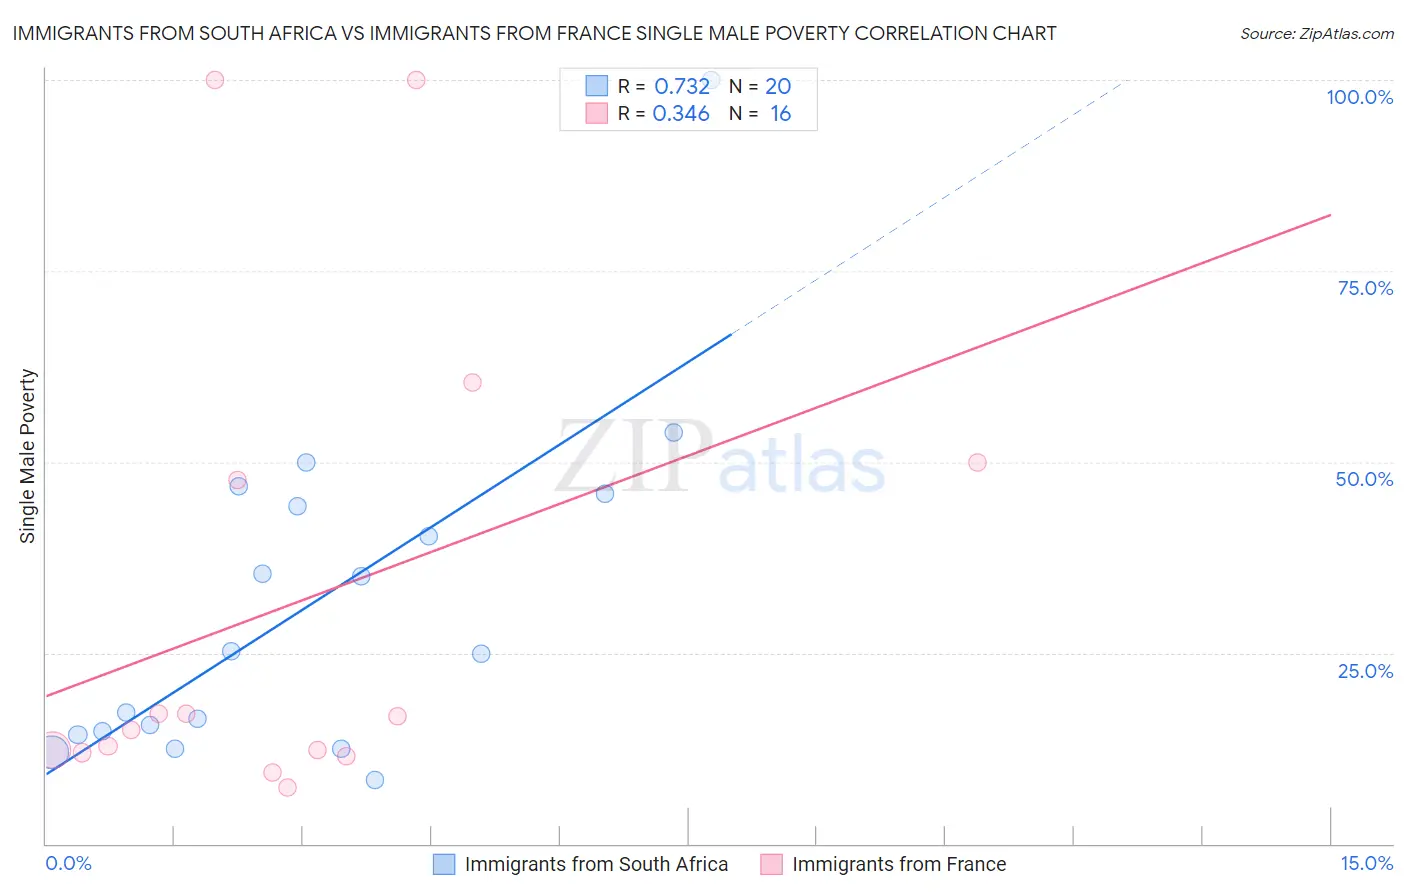 Immigrants from South Africa vs Immigrants from France Single Male Poverty